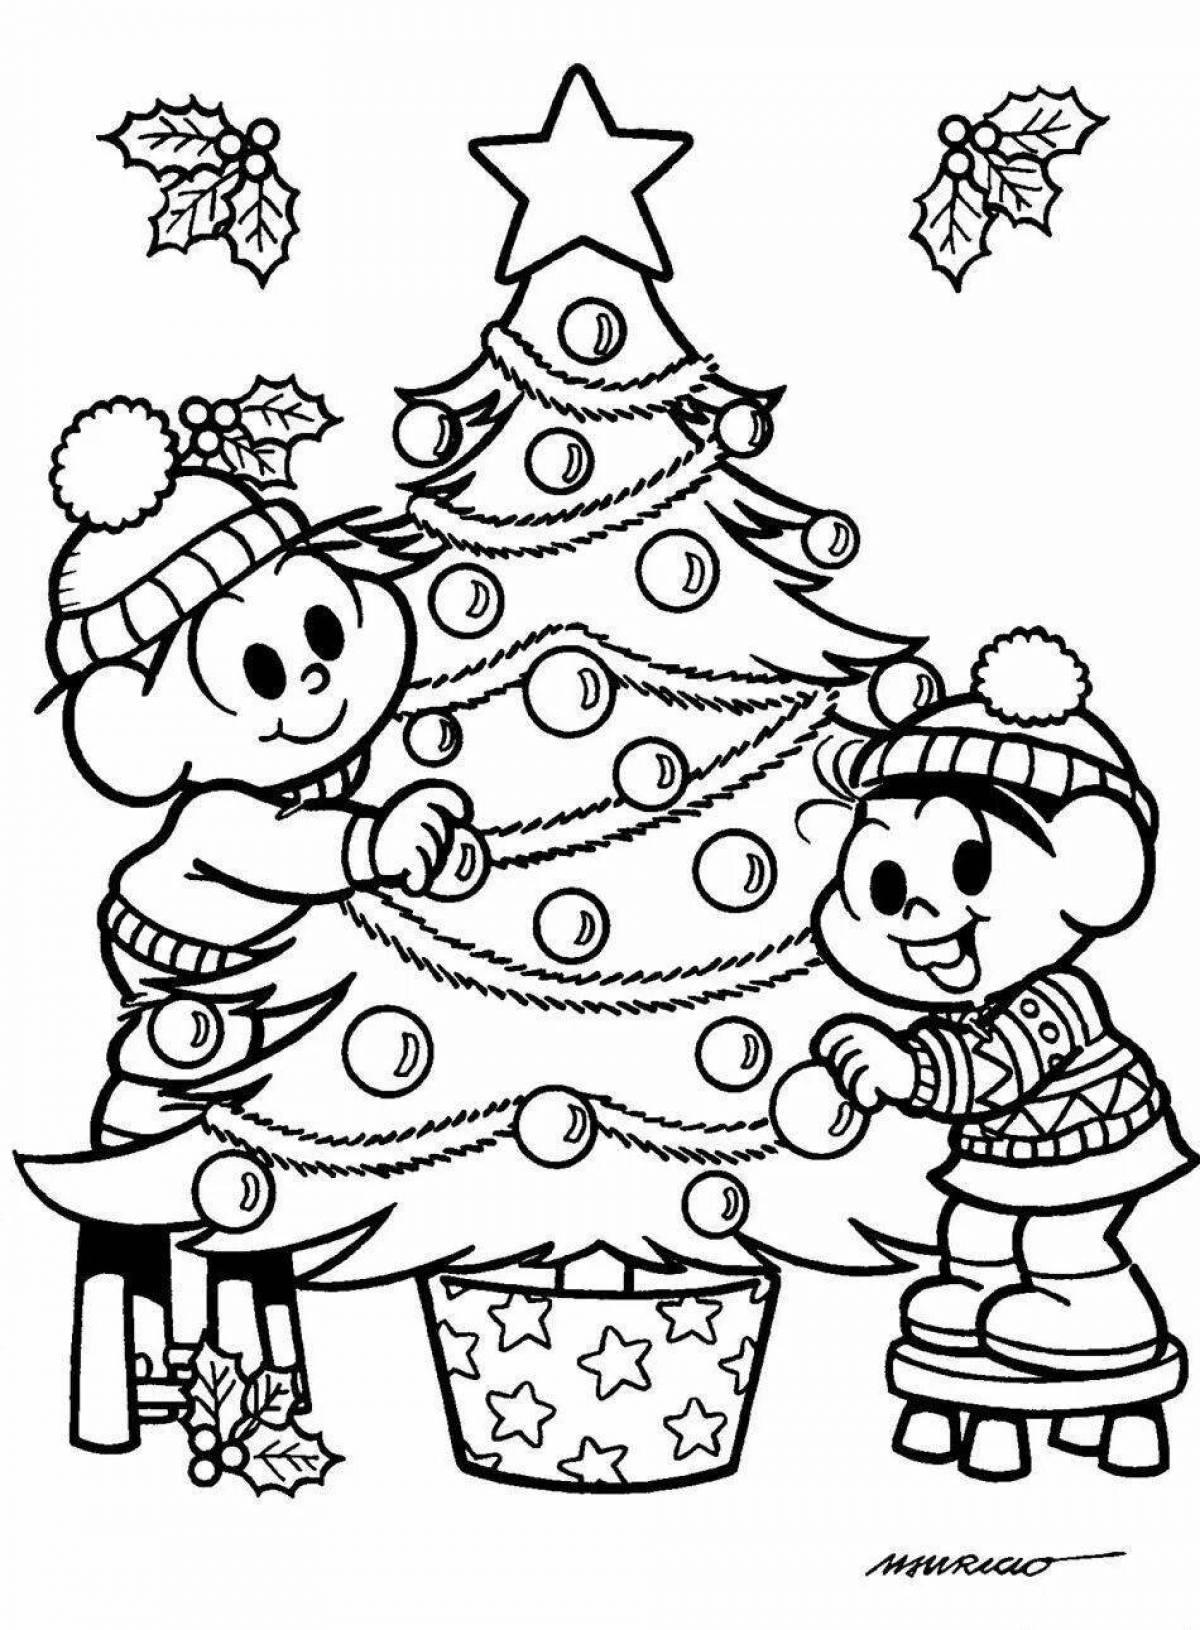 A playful Christmas tree coloring page for 5-6 year olds